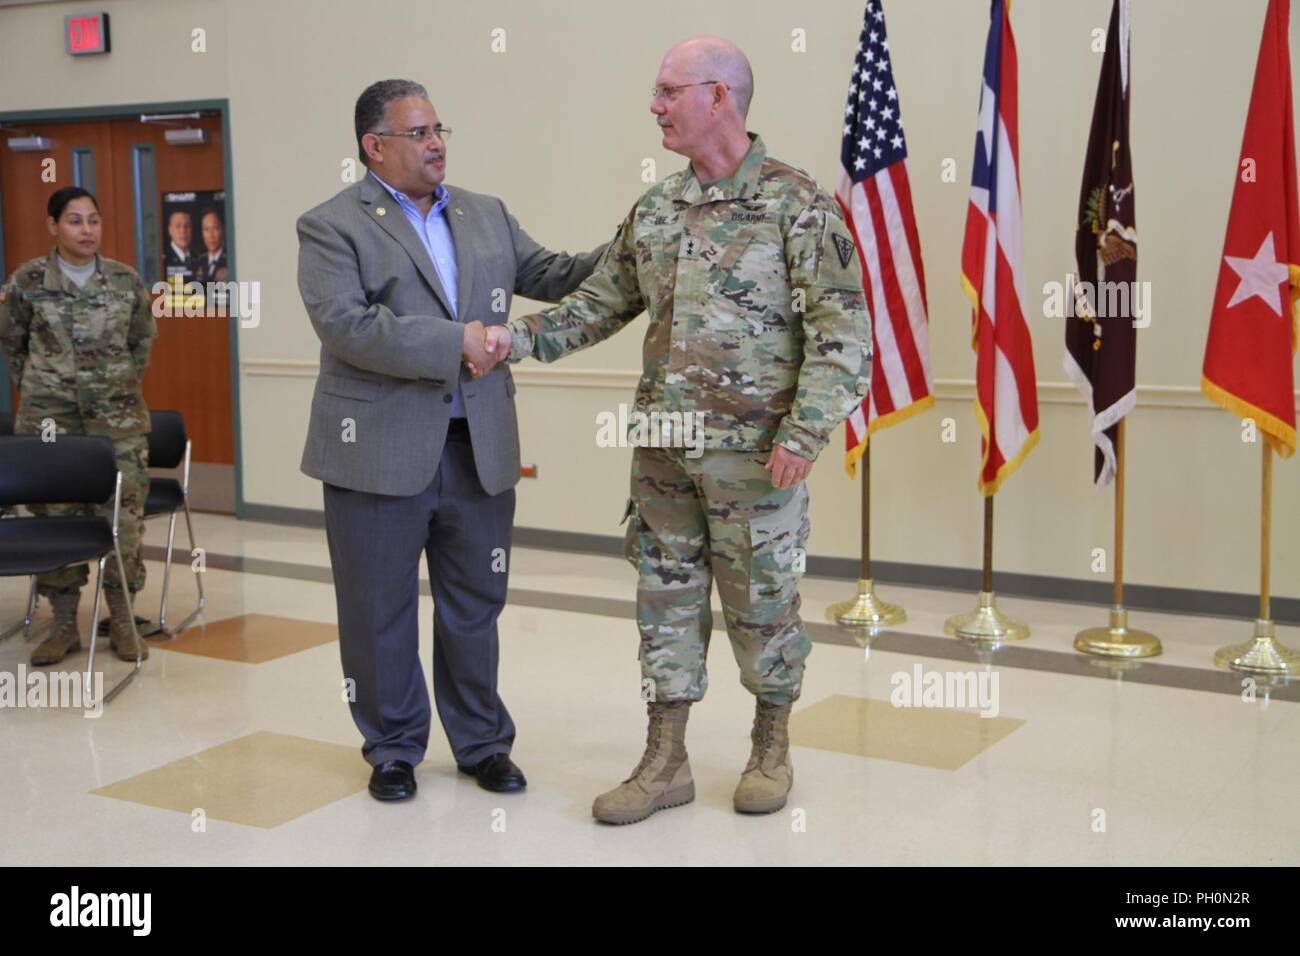 Maj. Gen. William Shane Lee, the Commander of the 3rd Medical Command (Deployment Support), gives the Secretary of Health for Puerto Rico, Dr. Rafael Rodriguez-Mercado, a division coin during the Humanitarian Service Medal Award ceremony. Stock Photo